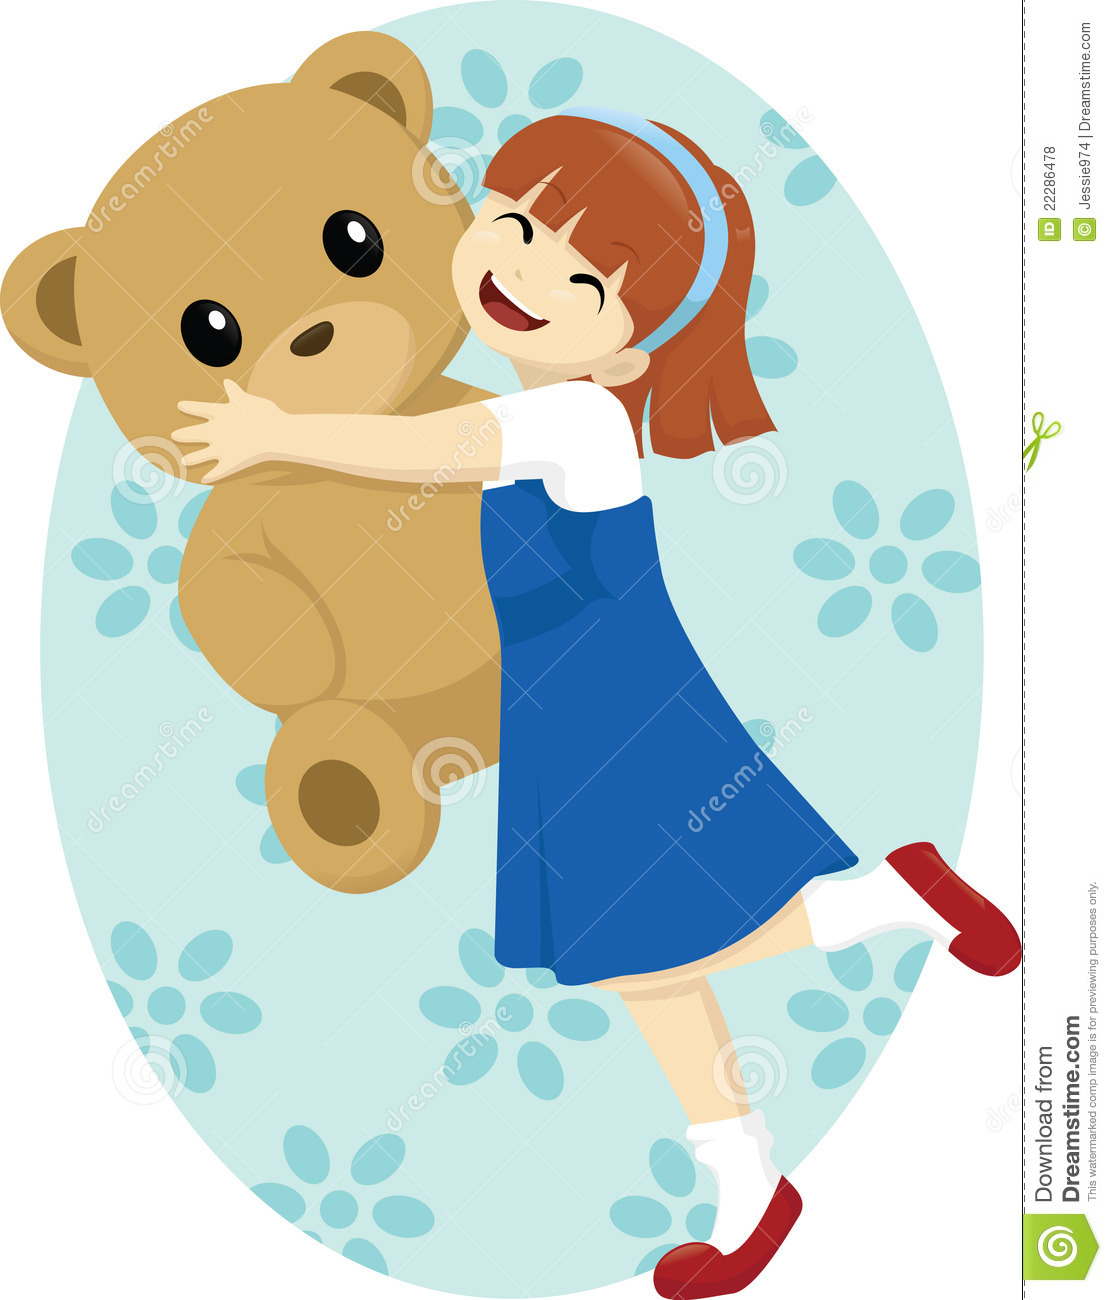 Illustration Of A Little Girl Dancing Happily With Her Big Teddy Bear